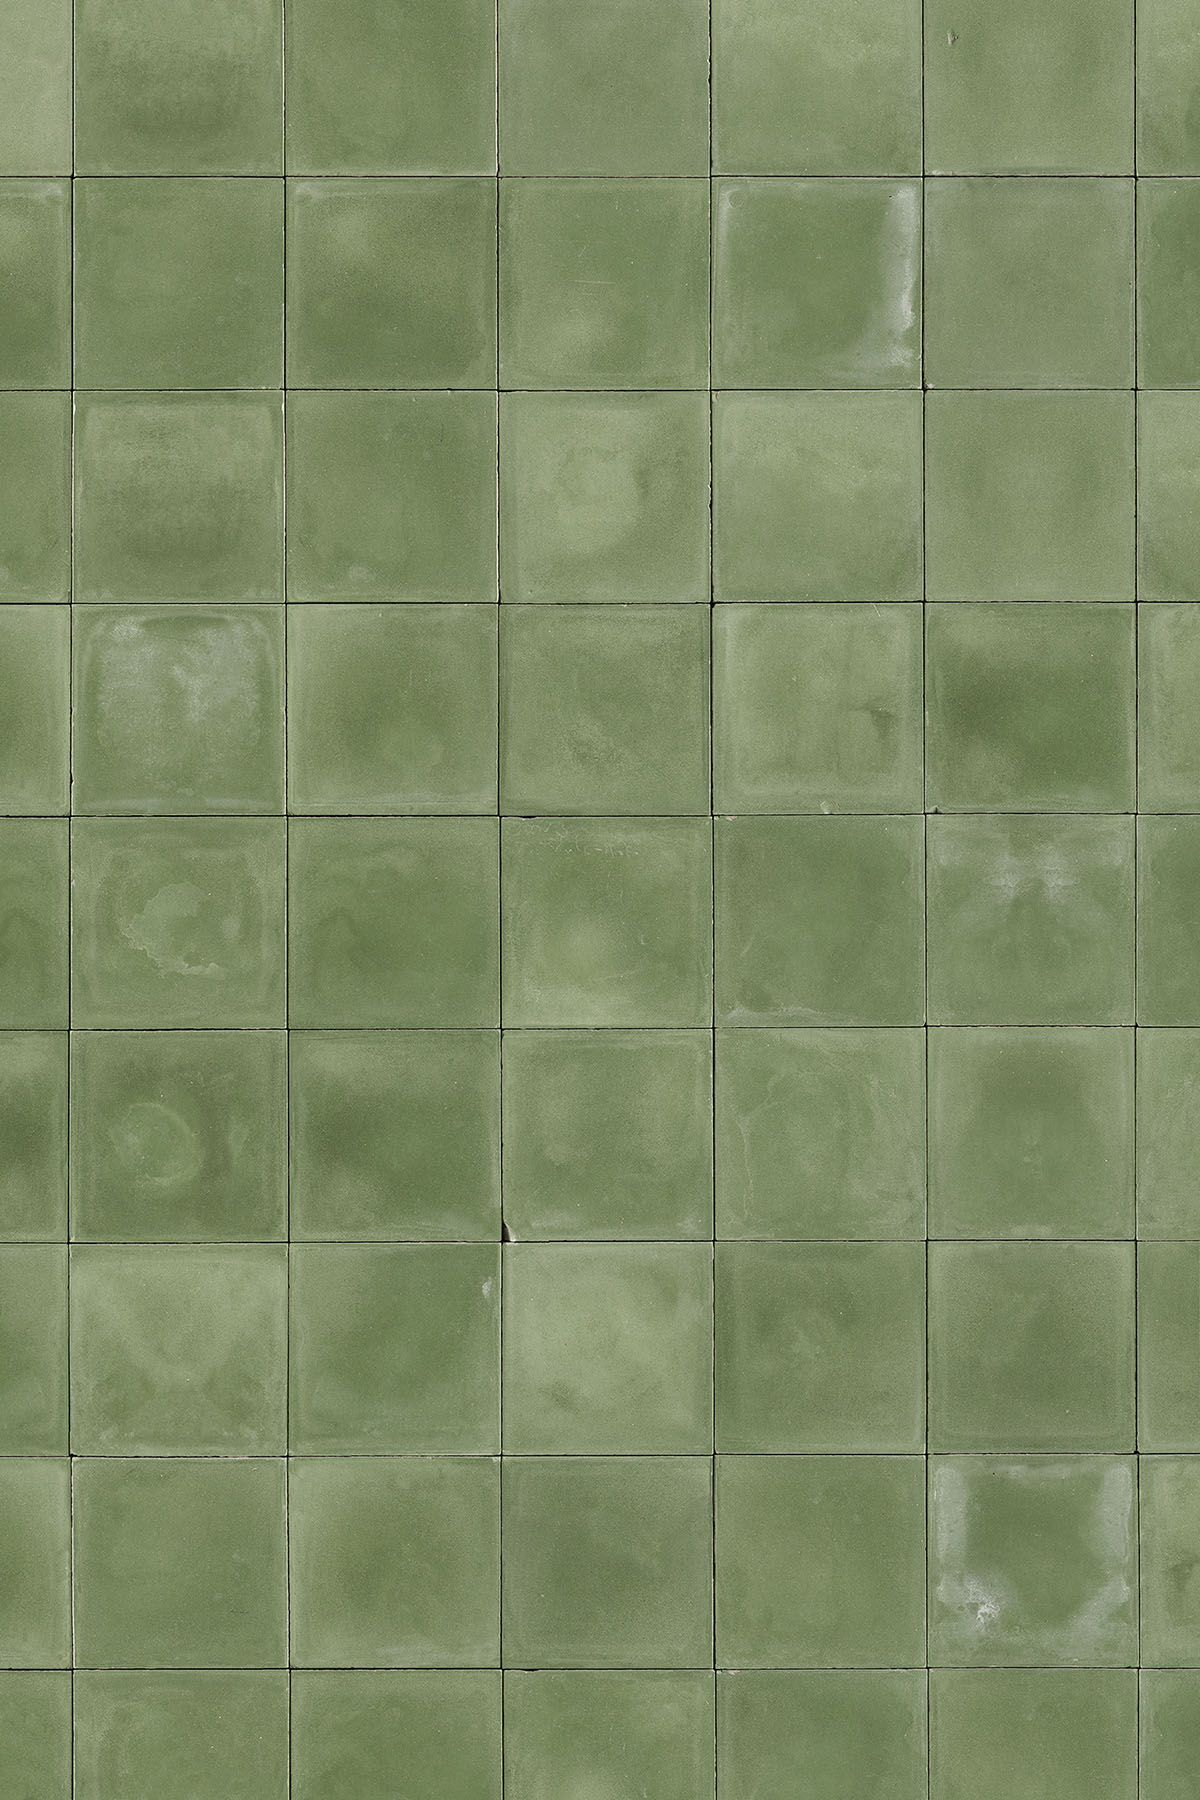 Fresh green tiles photography surface for content creation